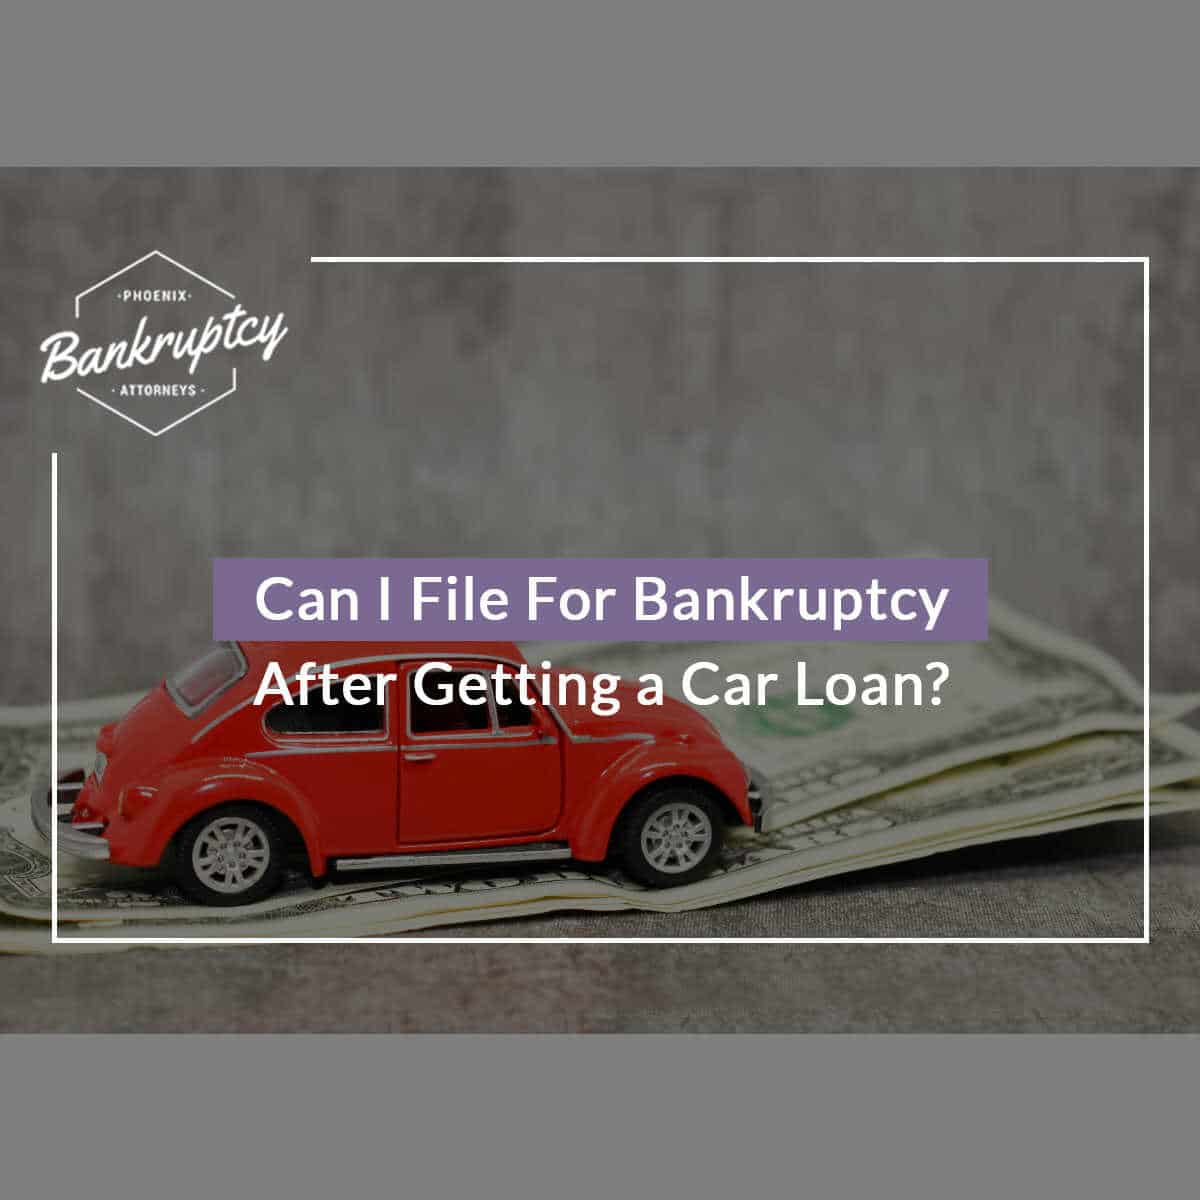 Can I File For Bankruptcy After Getting a Car Loan?